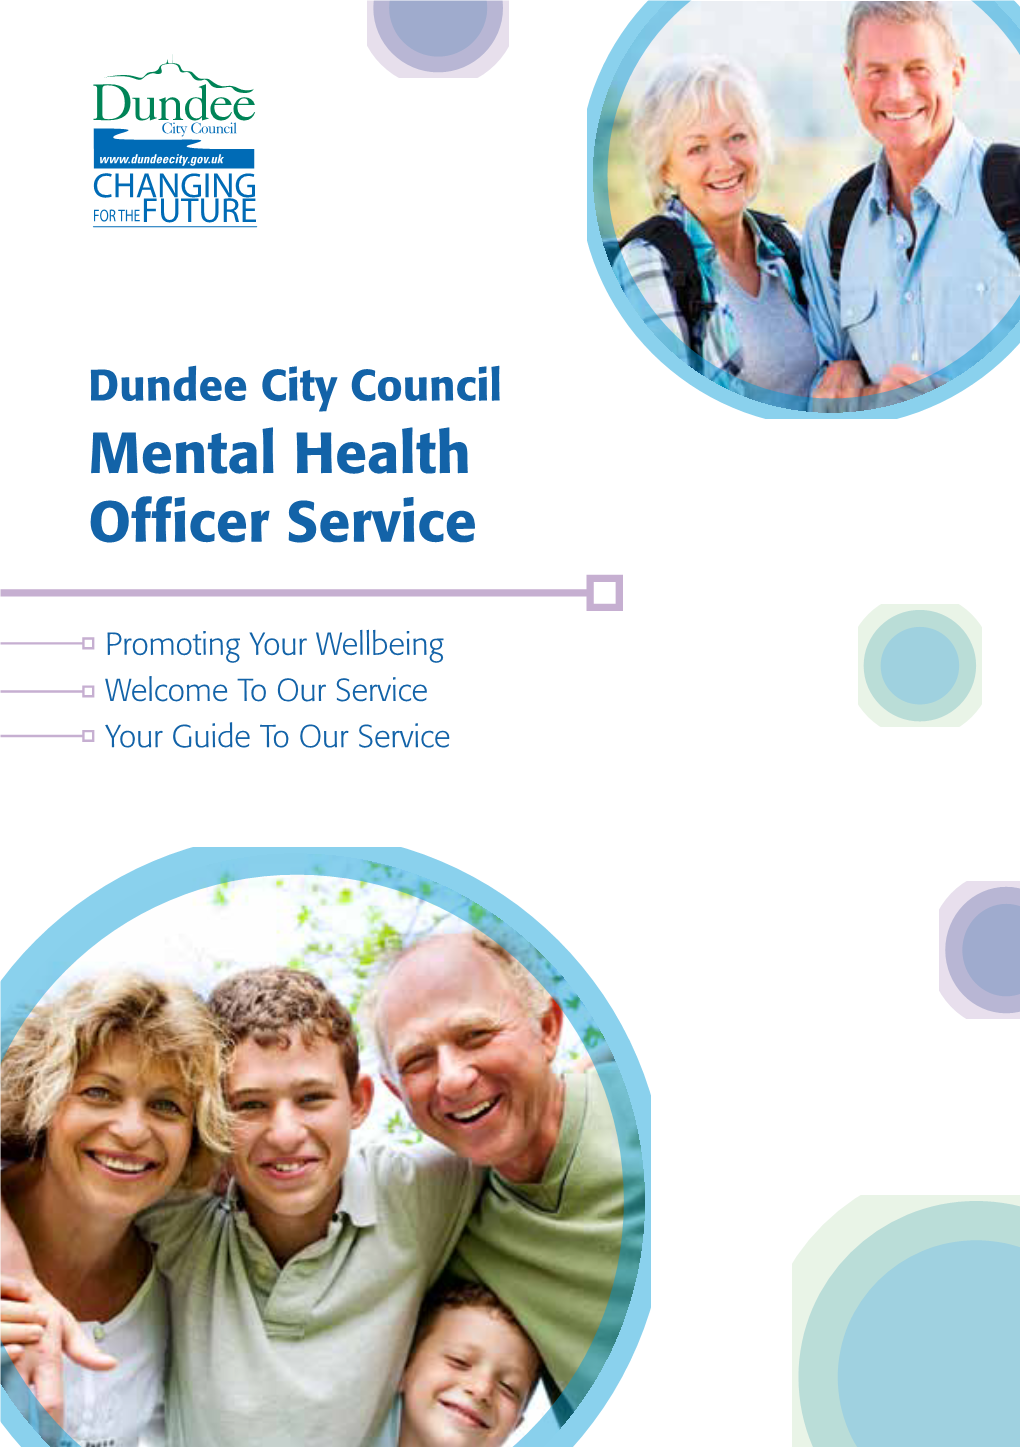 Dundee Mental Health Officer Service